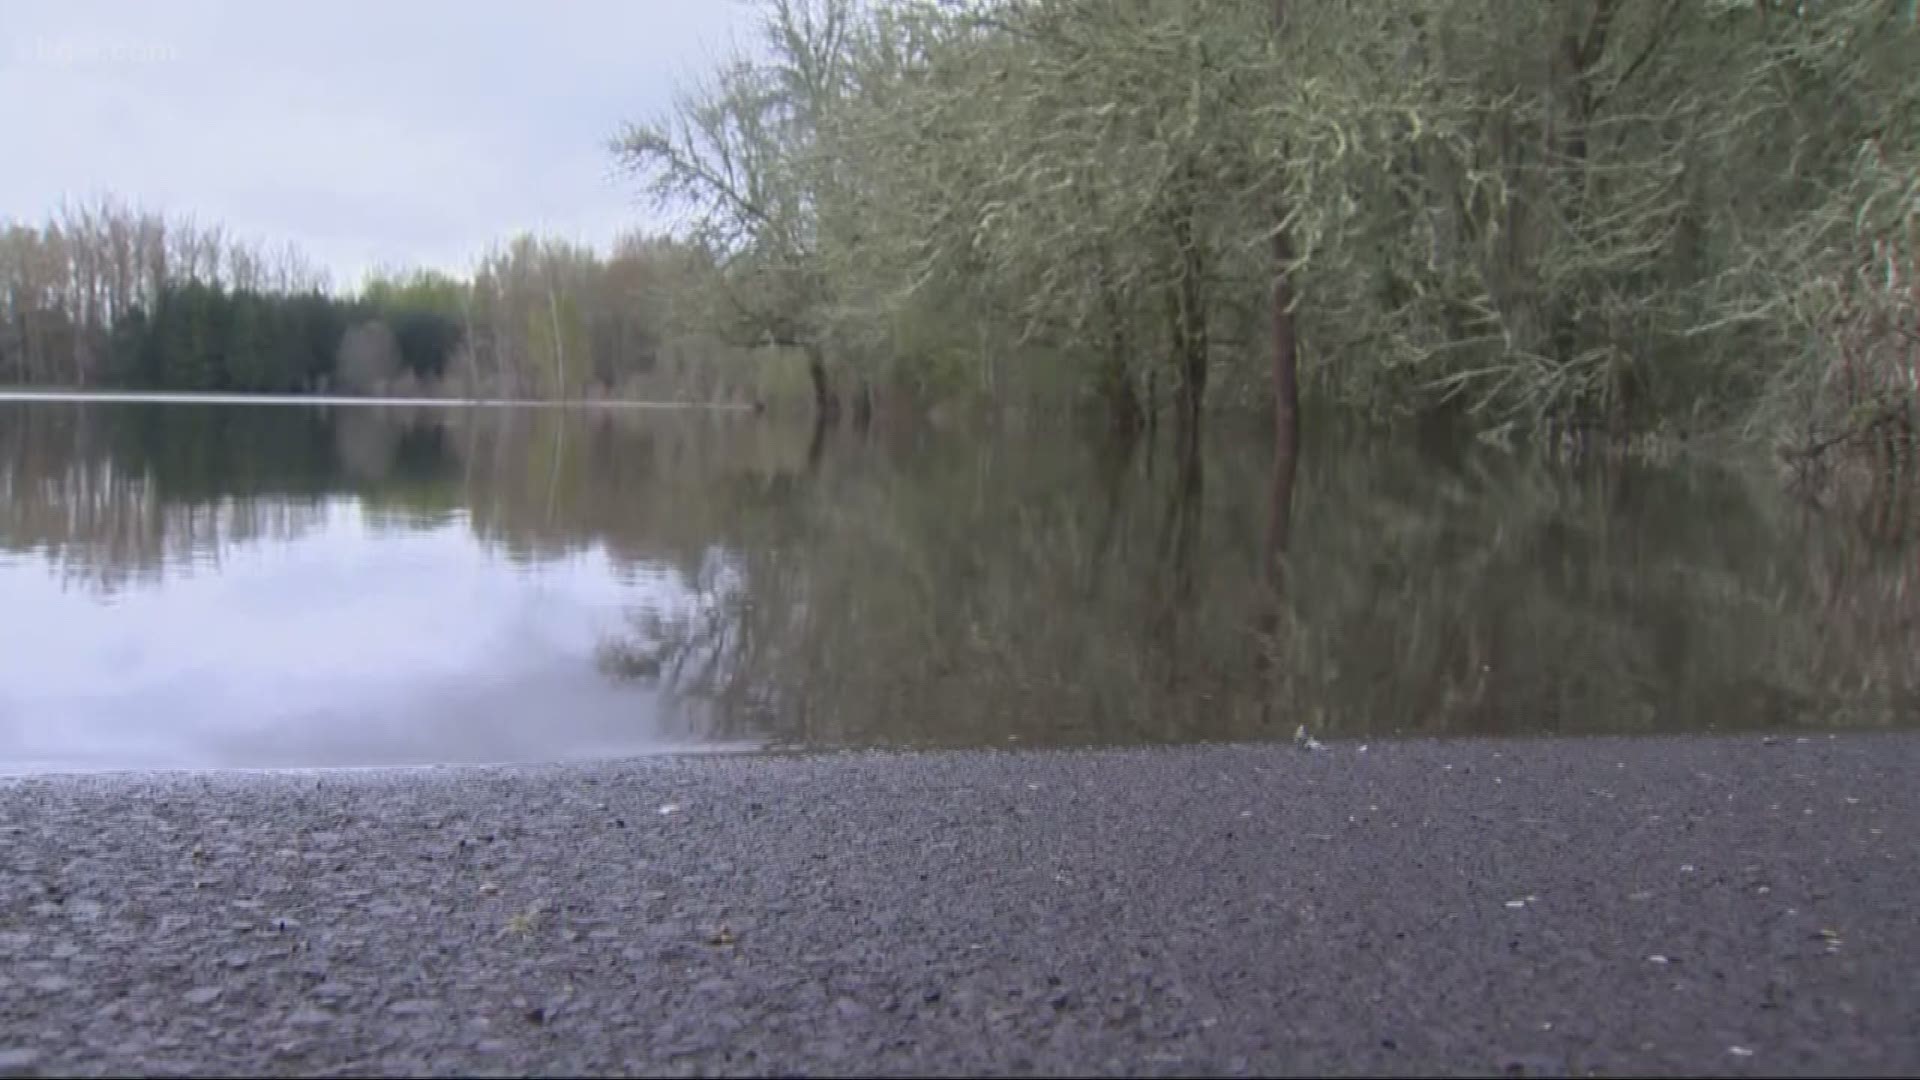 Heavy rain caused flooding in parts of Marion County.